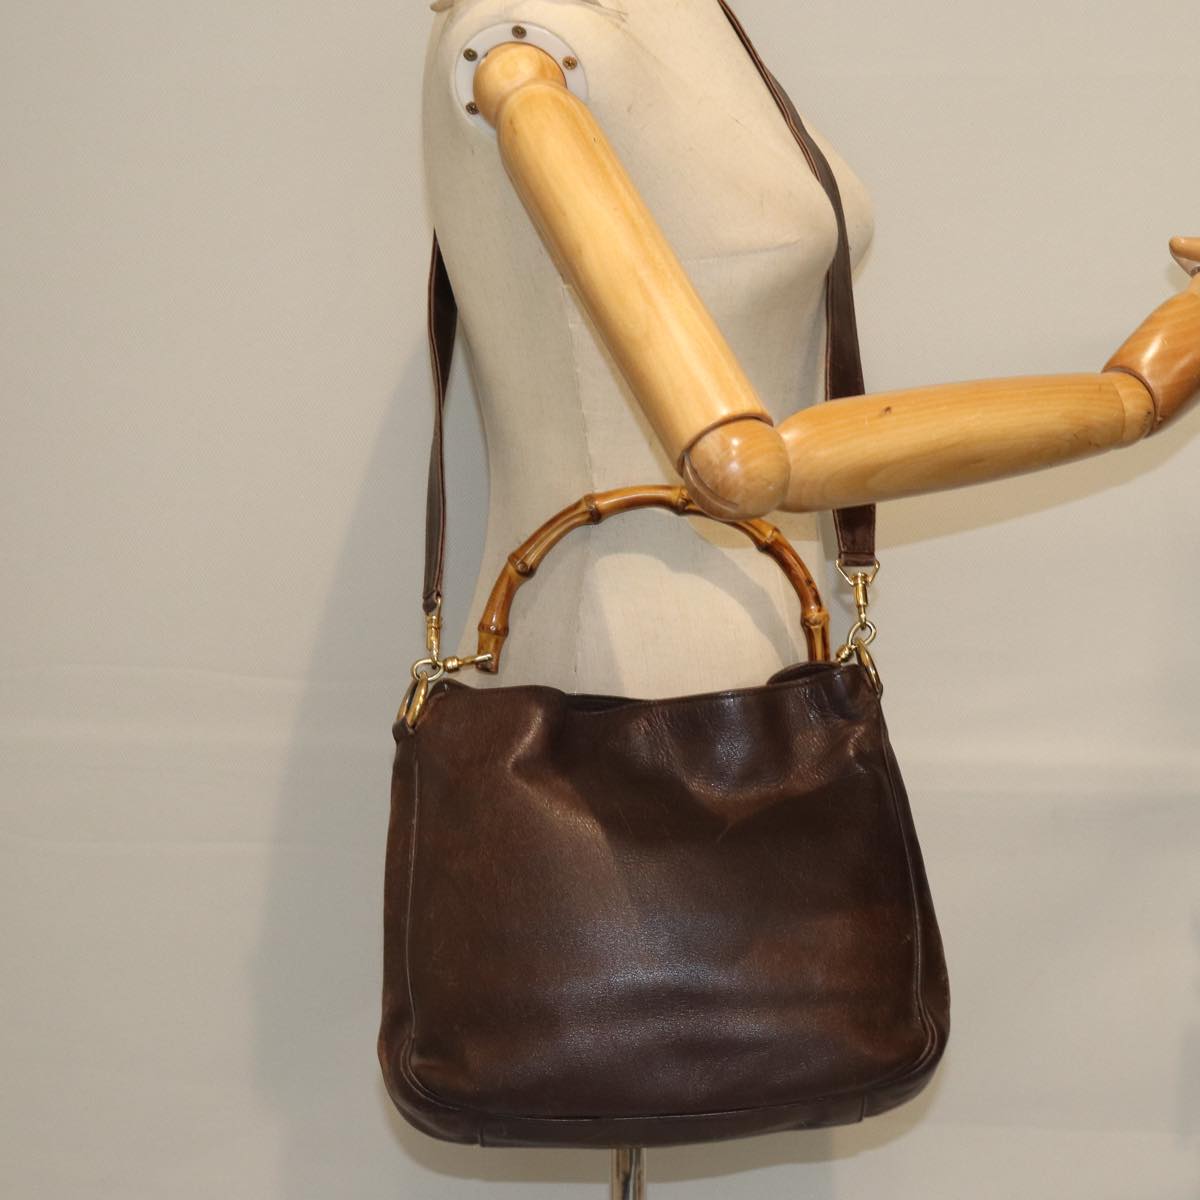 GUCCI Bamboo Hand Bag Leather 2way Brown 001 1638 Auth 75115